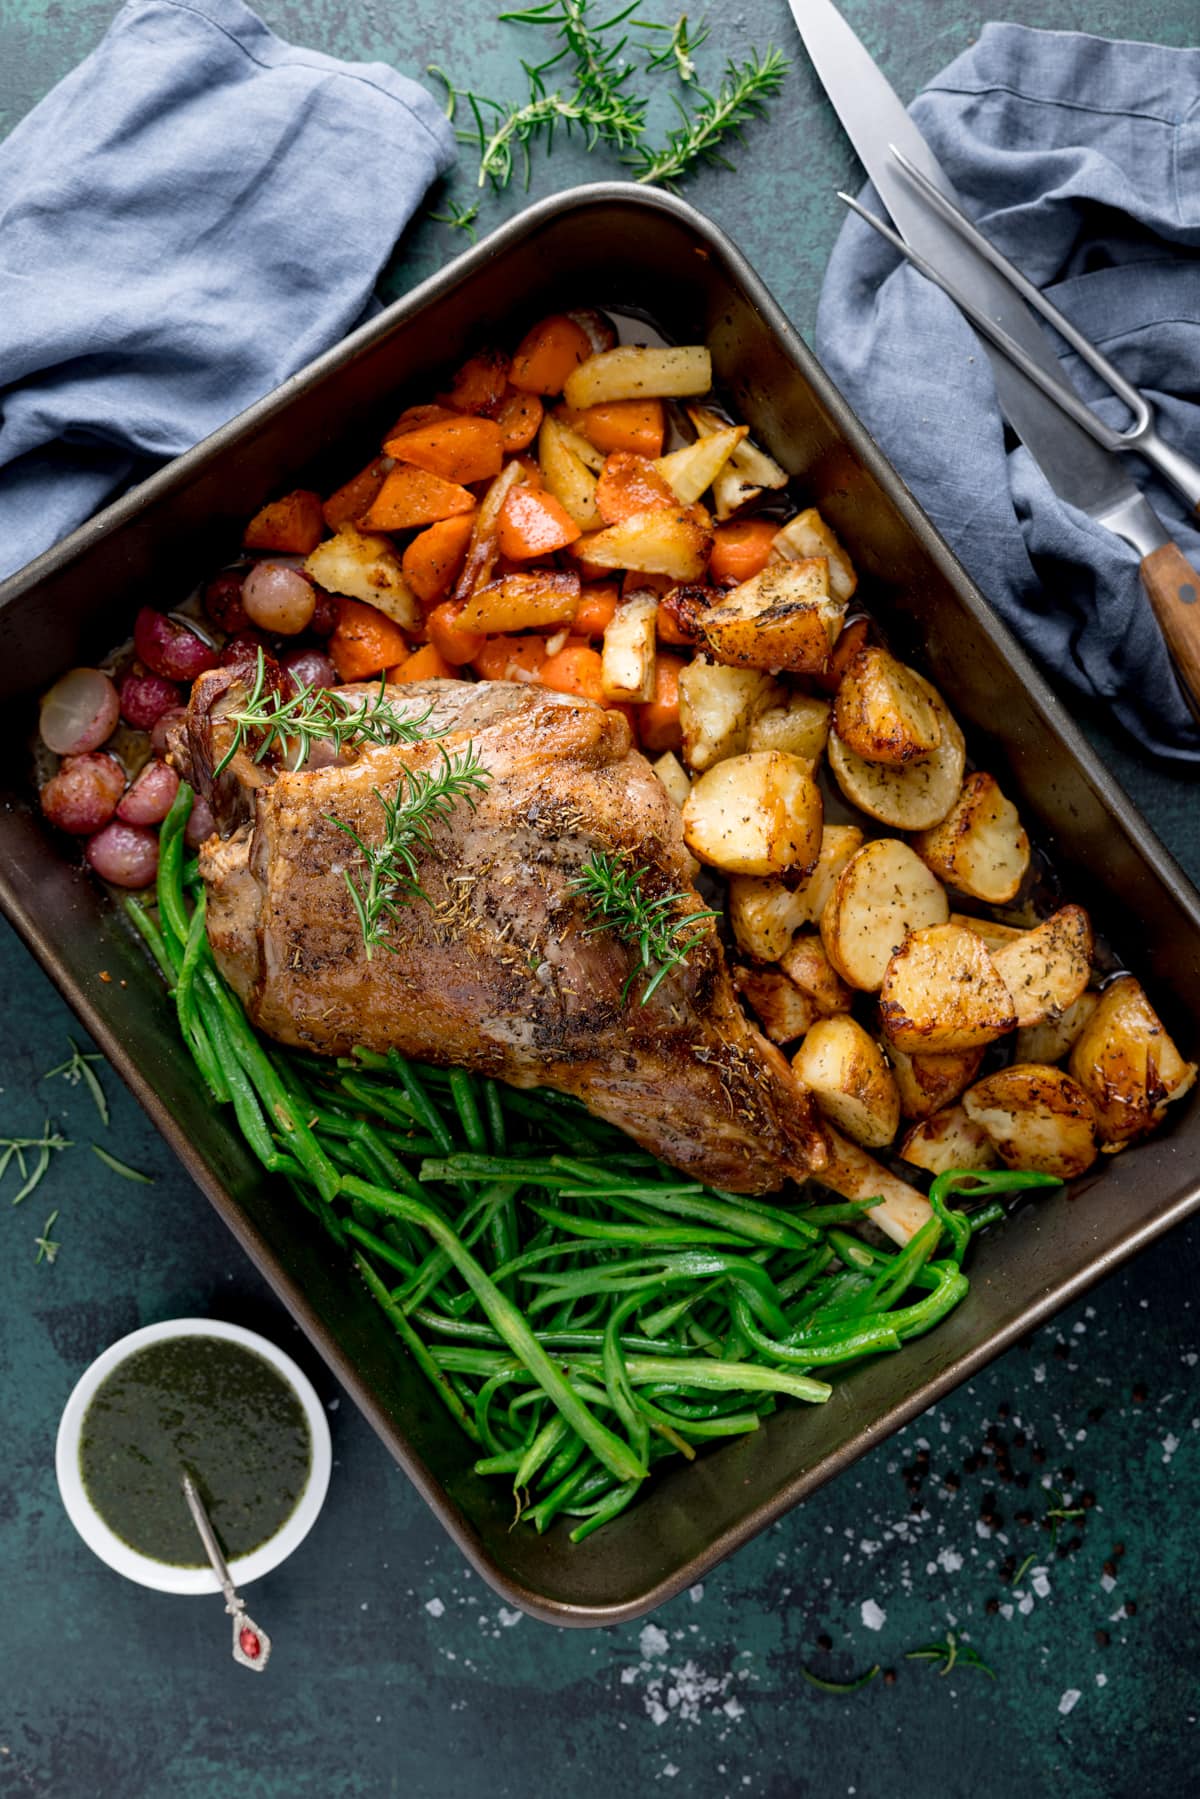 A large roasting pan with a roast leg of lamb with veggies and potatoes in there too garnished with a couple of sprigs of fresh rosemary. The tin is sat on a blue/green board with a bowl of mint sauce in the background.